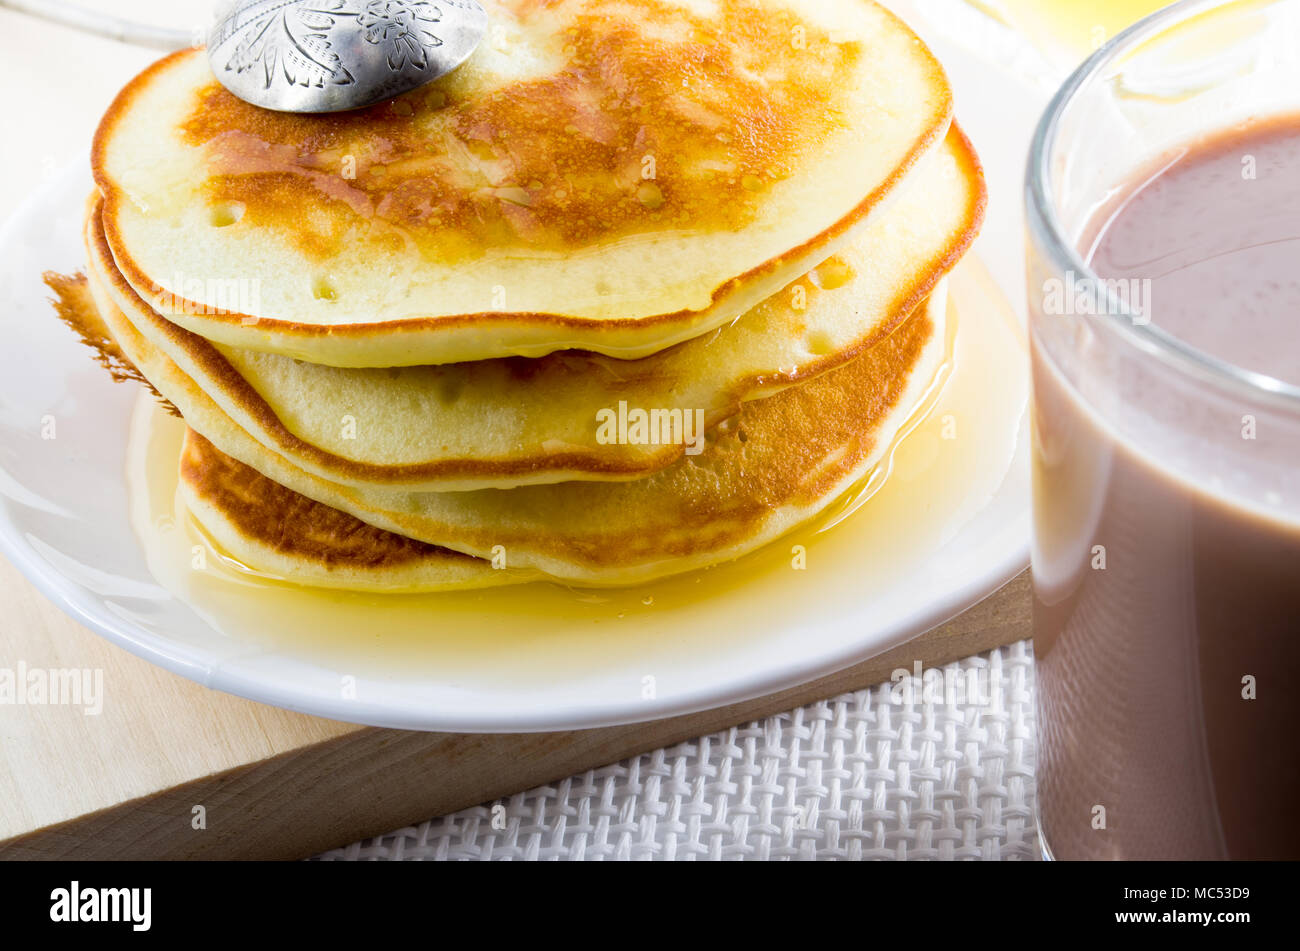 A mug of hot cocoa and pancakes with honey close-up with shallow depth of focus Stock Photo